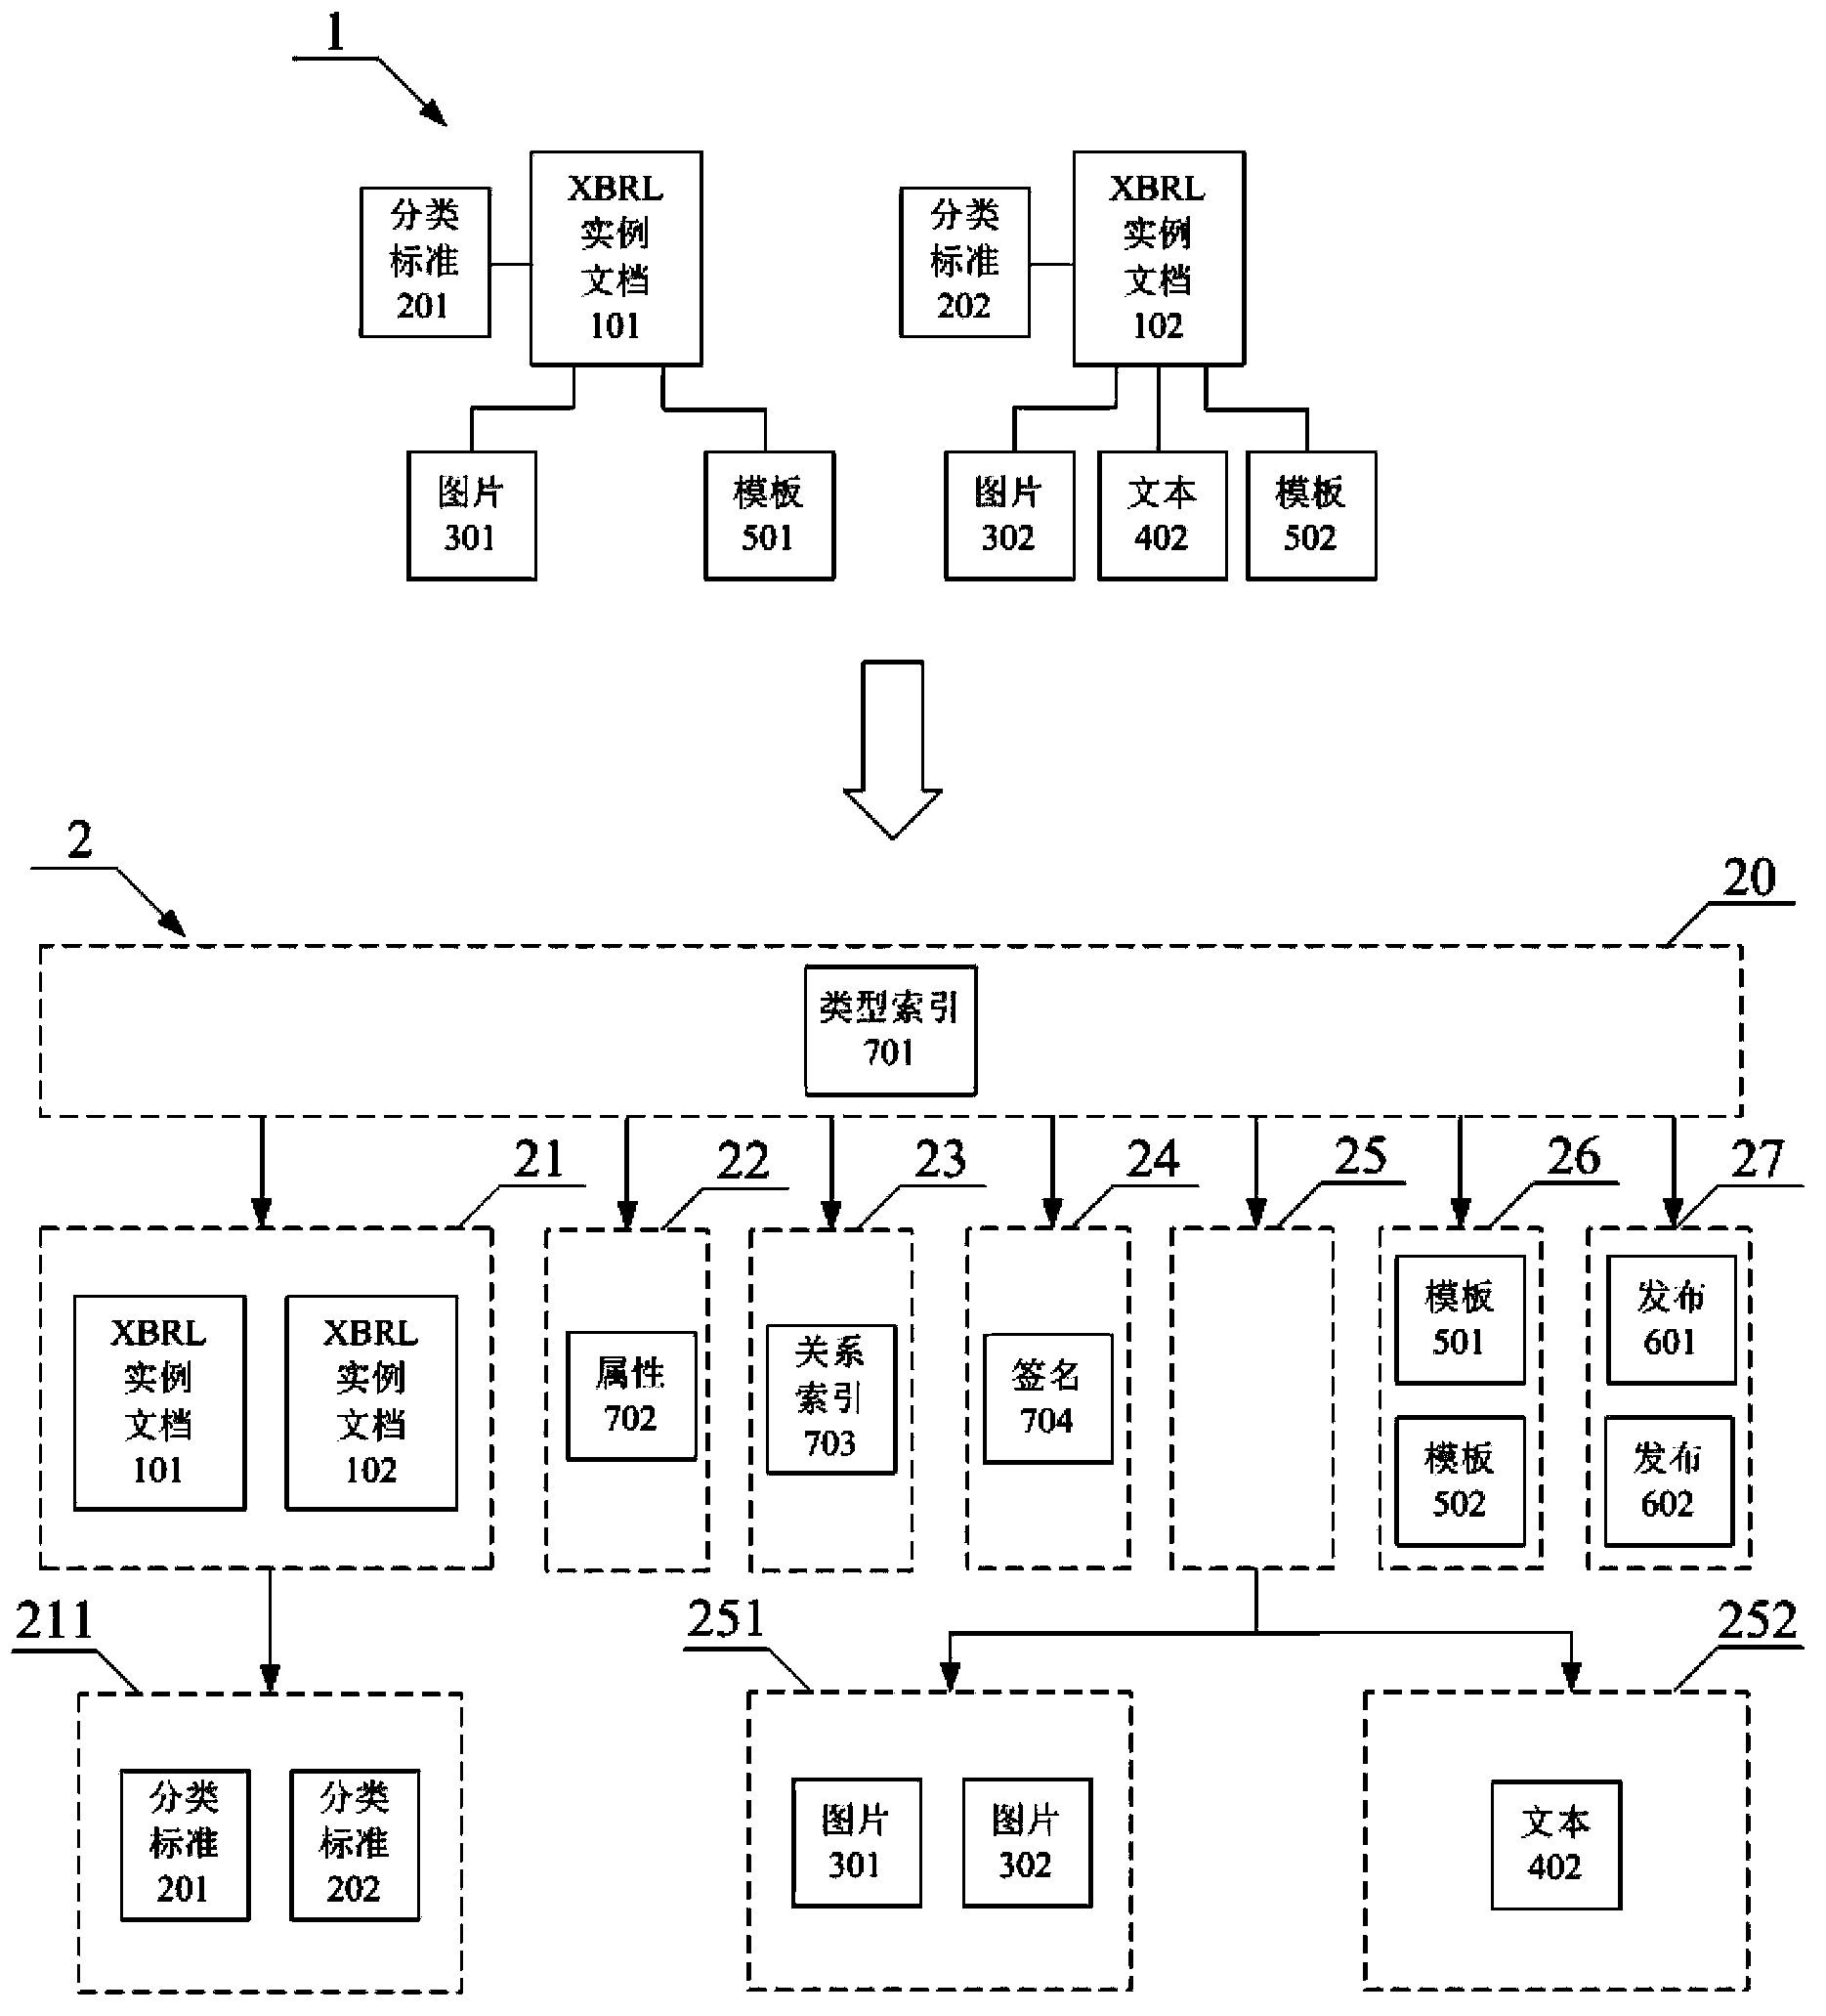 Method for encapsulating XBRL (extensible business reporting language) instance documents